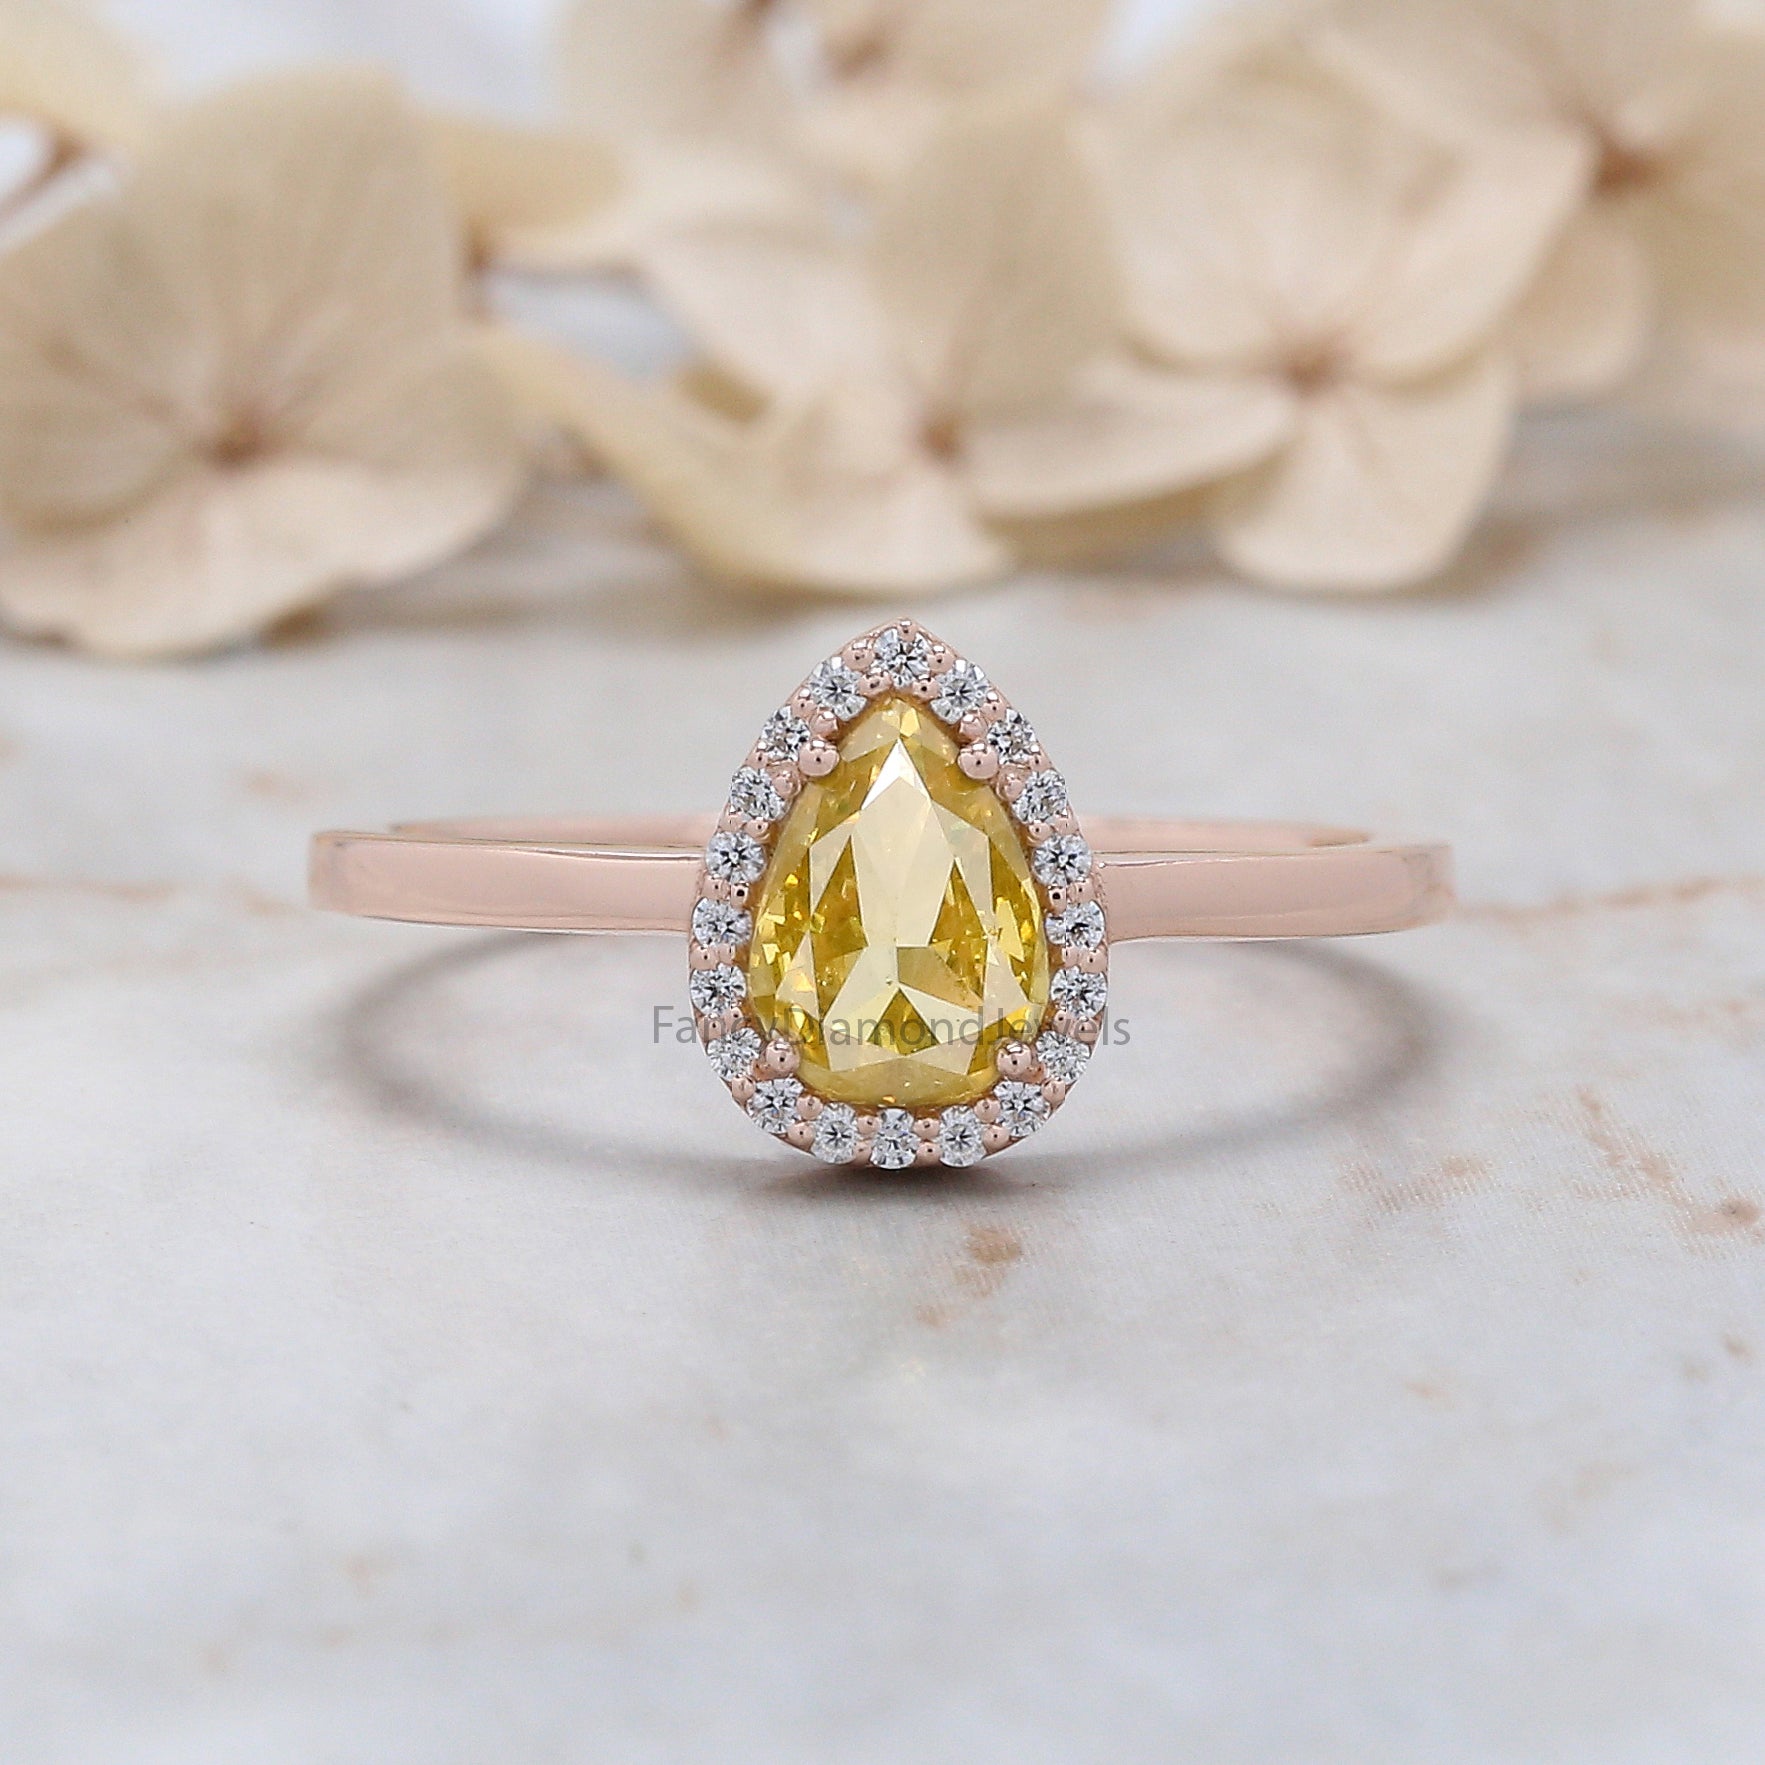 Pear Cut Yellow Color Diamond Ring 0.59 Ct 6.70 MM Pear Diamond Ring 14K Solid Rose Gold Silver Pear Engagement Ring Gift For Her QL6470